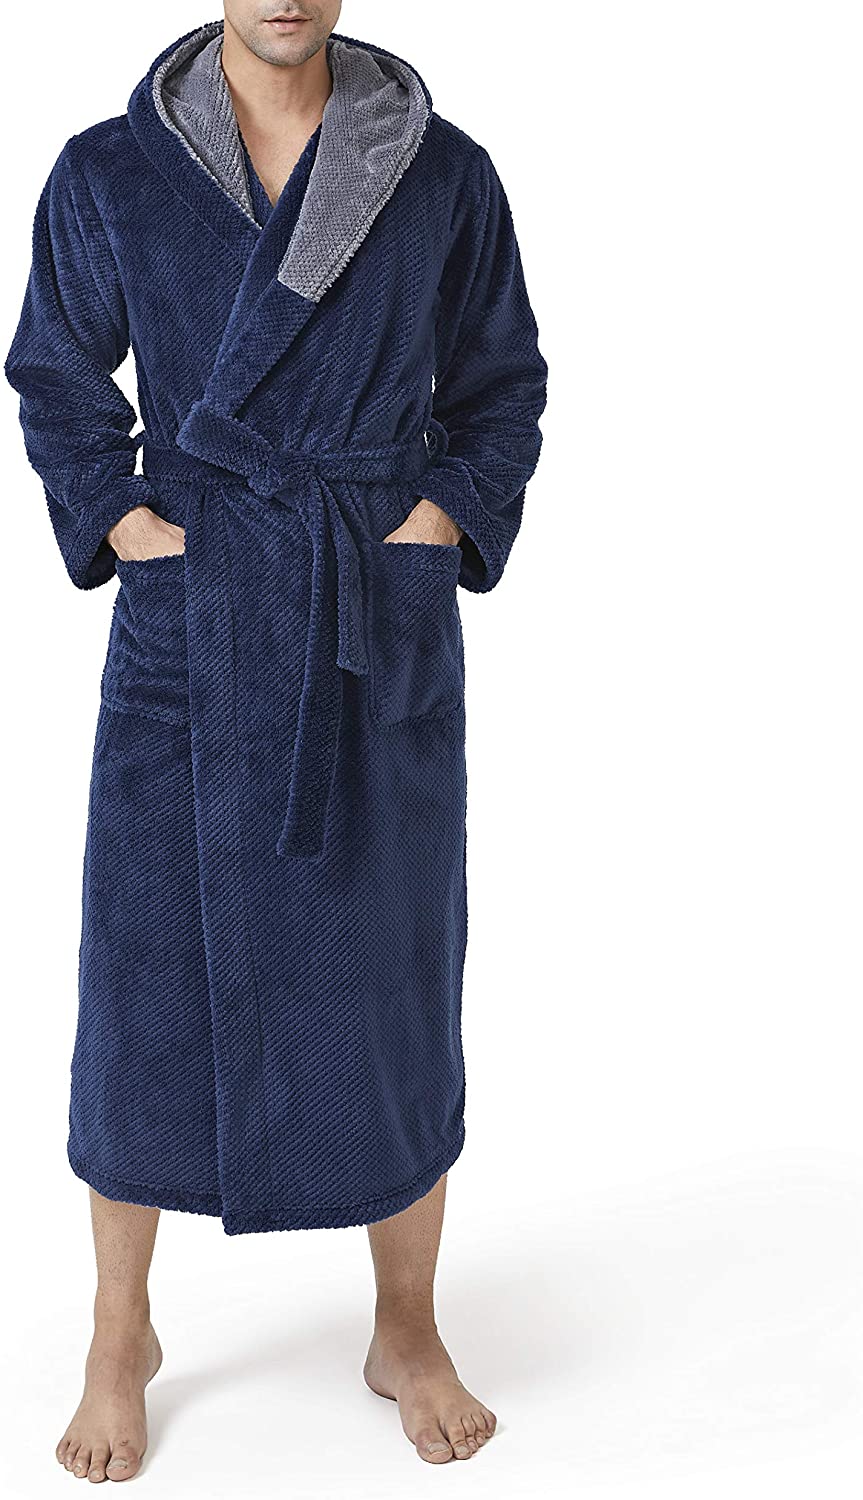 David Archy Flannel Robe With Hooded Premium Micro Fleece Full Length Warm  Plush Coral Comfy Premium